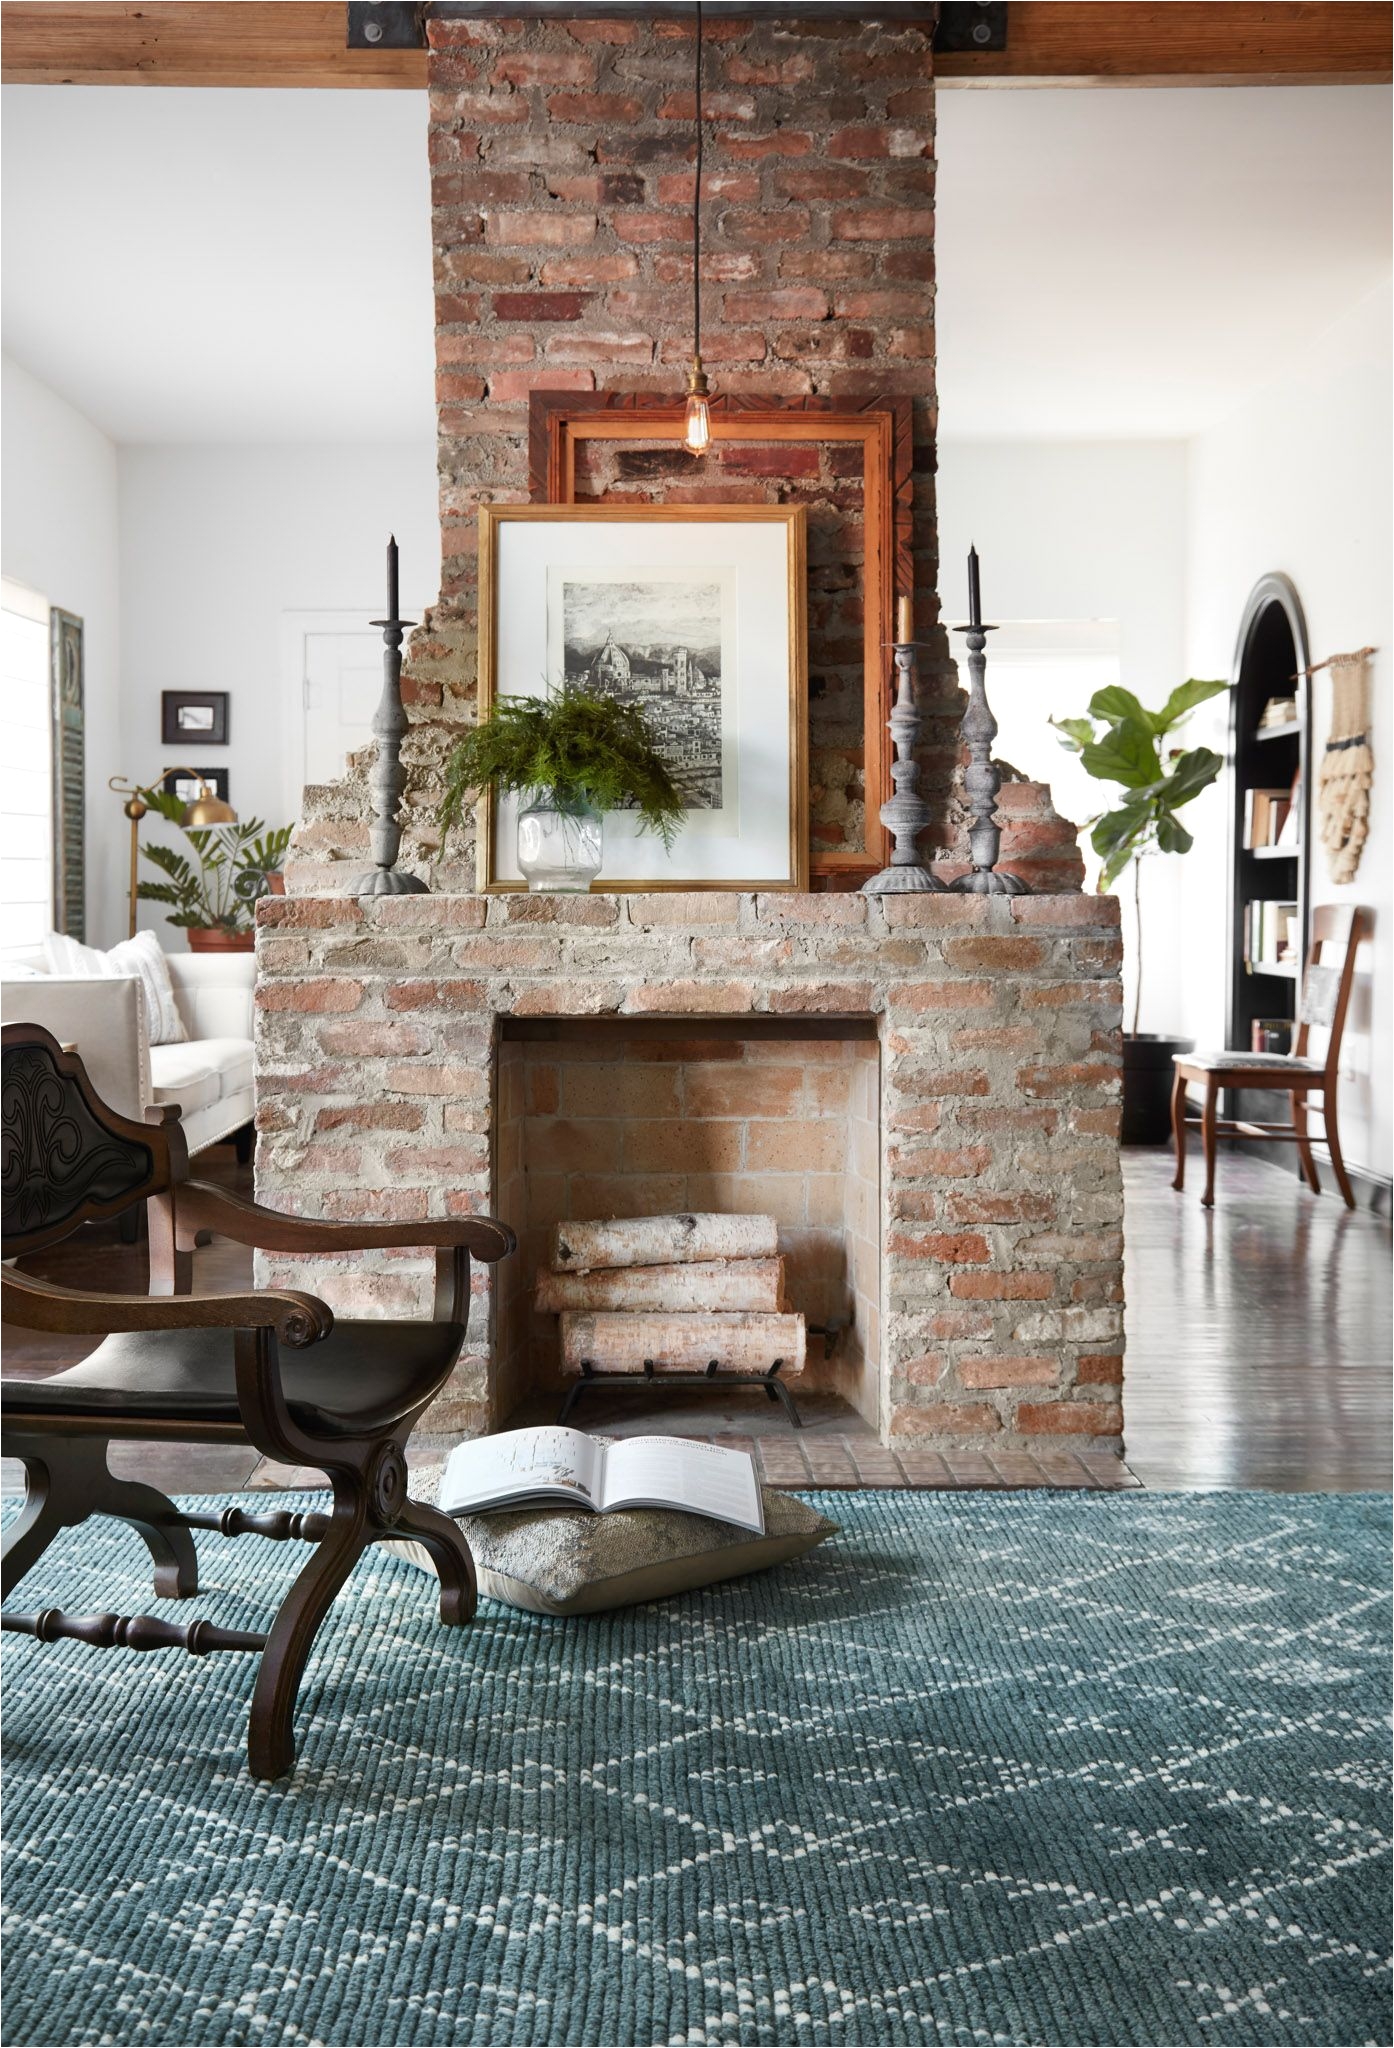 a good room starts with a good rug the magnolia home by joanna gaines tulum tf 04 blue blue rug now available on magnoliamarket com and retailers